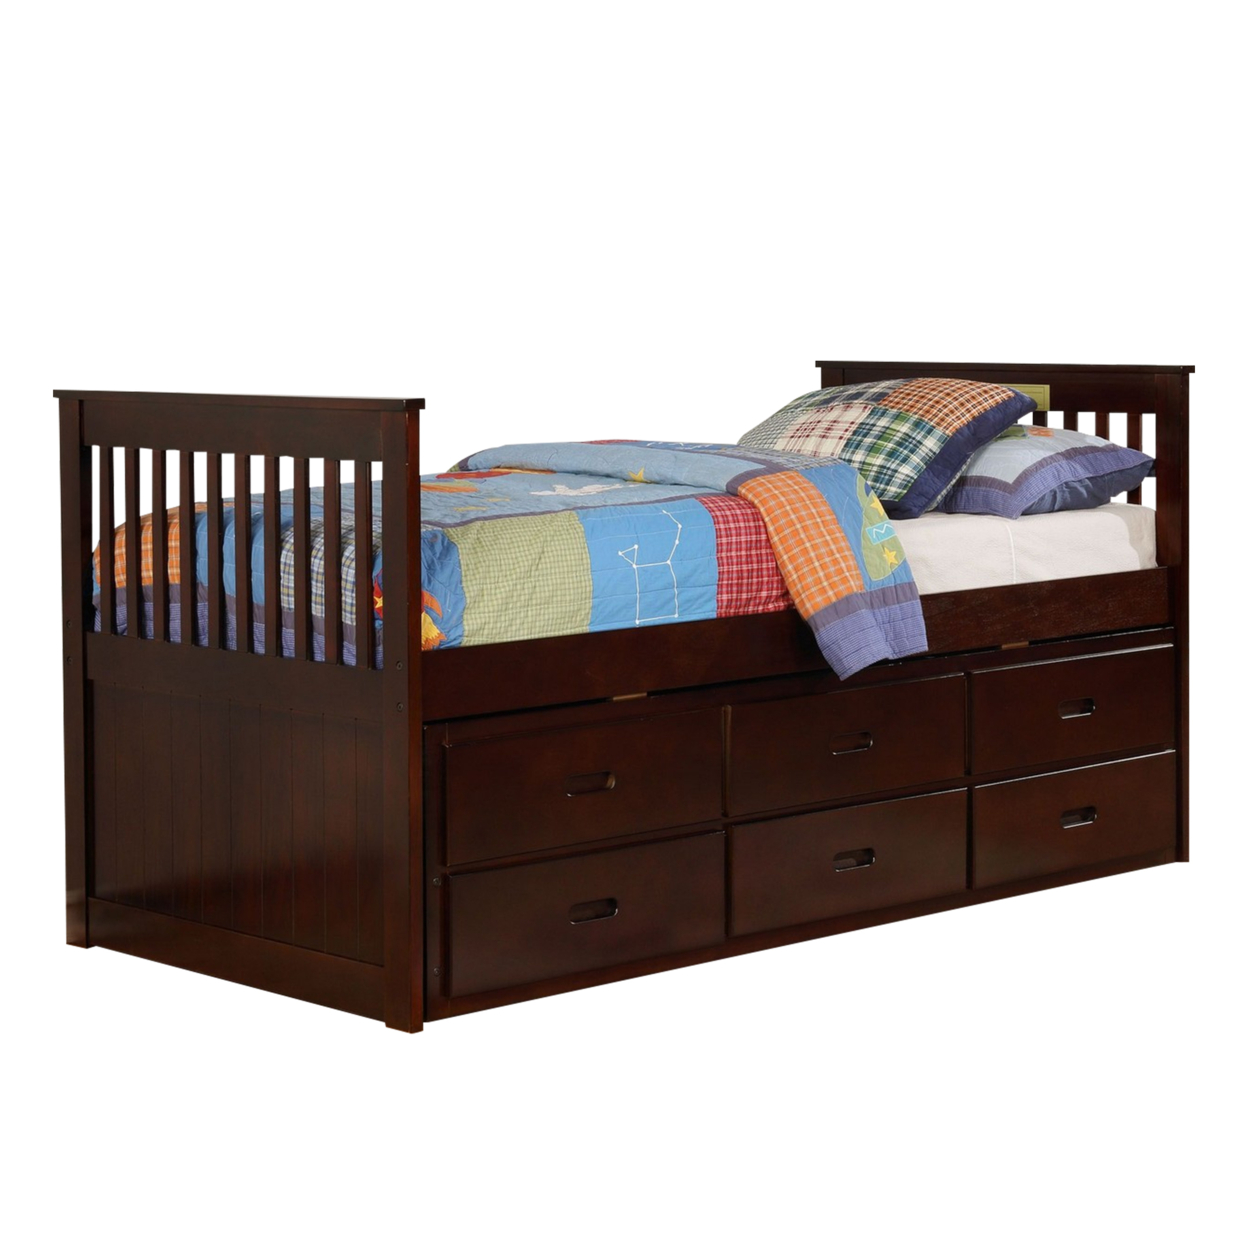 Mission Style Wooden Twin Captain Bed With Trundle And 3 Drawers, Brown- Saltoro Sherpi